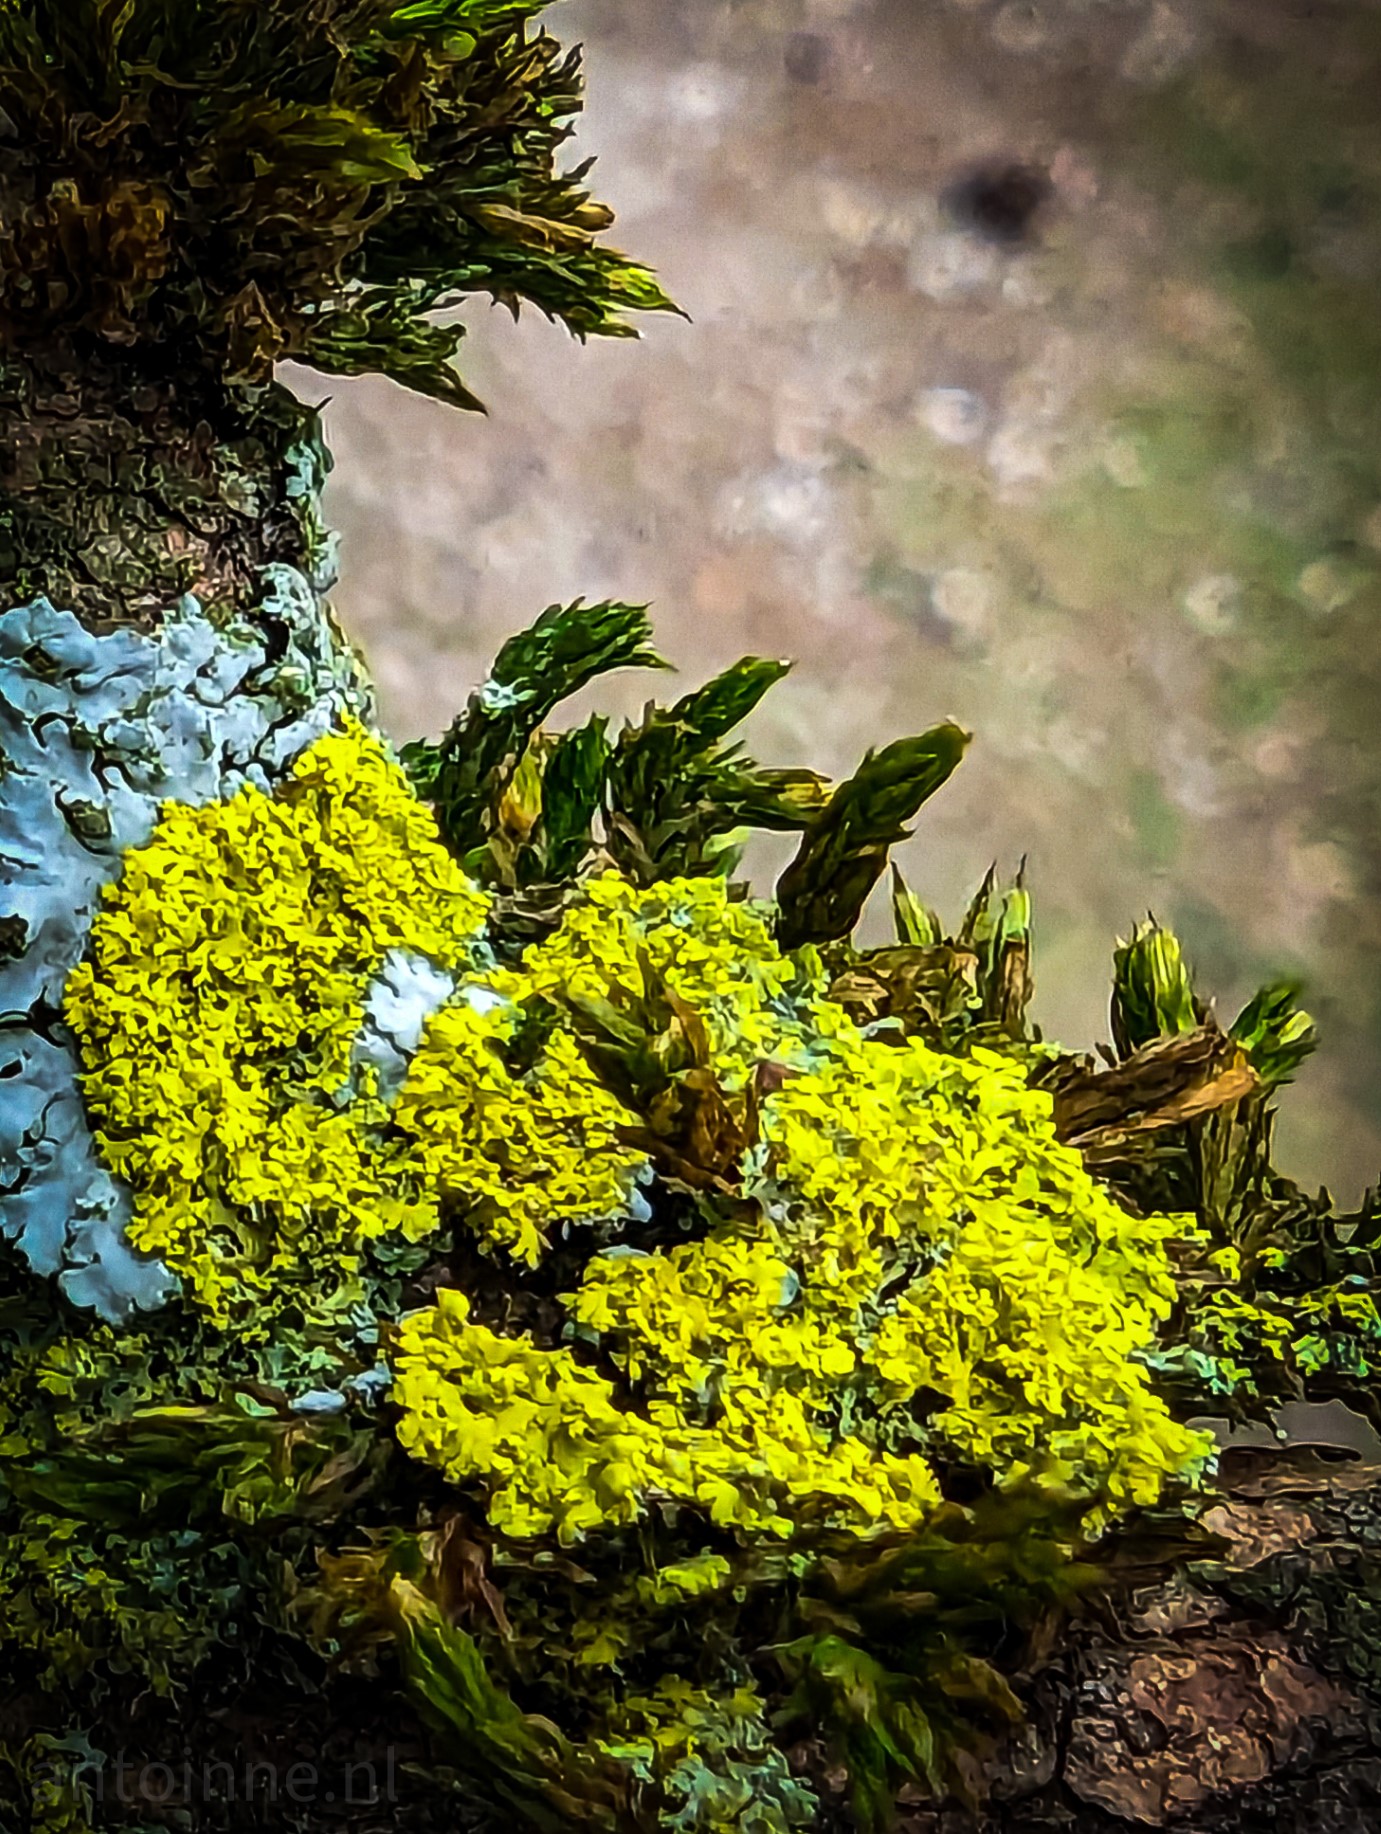 A close-up shot of lichen on a tree branch.